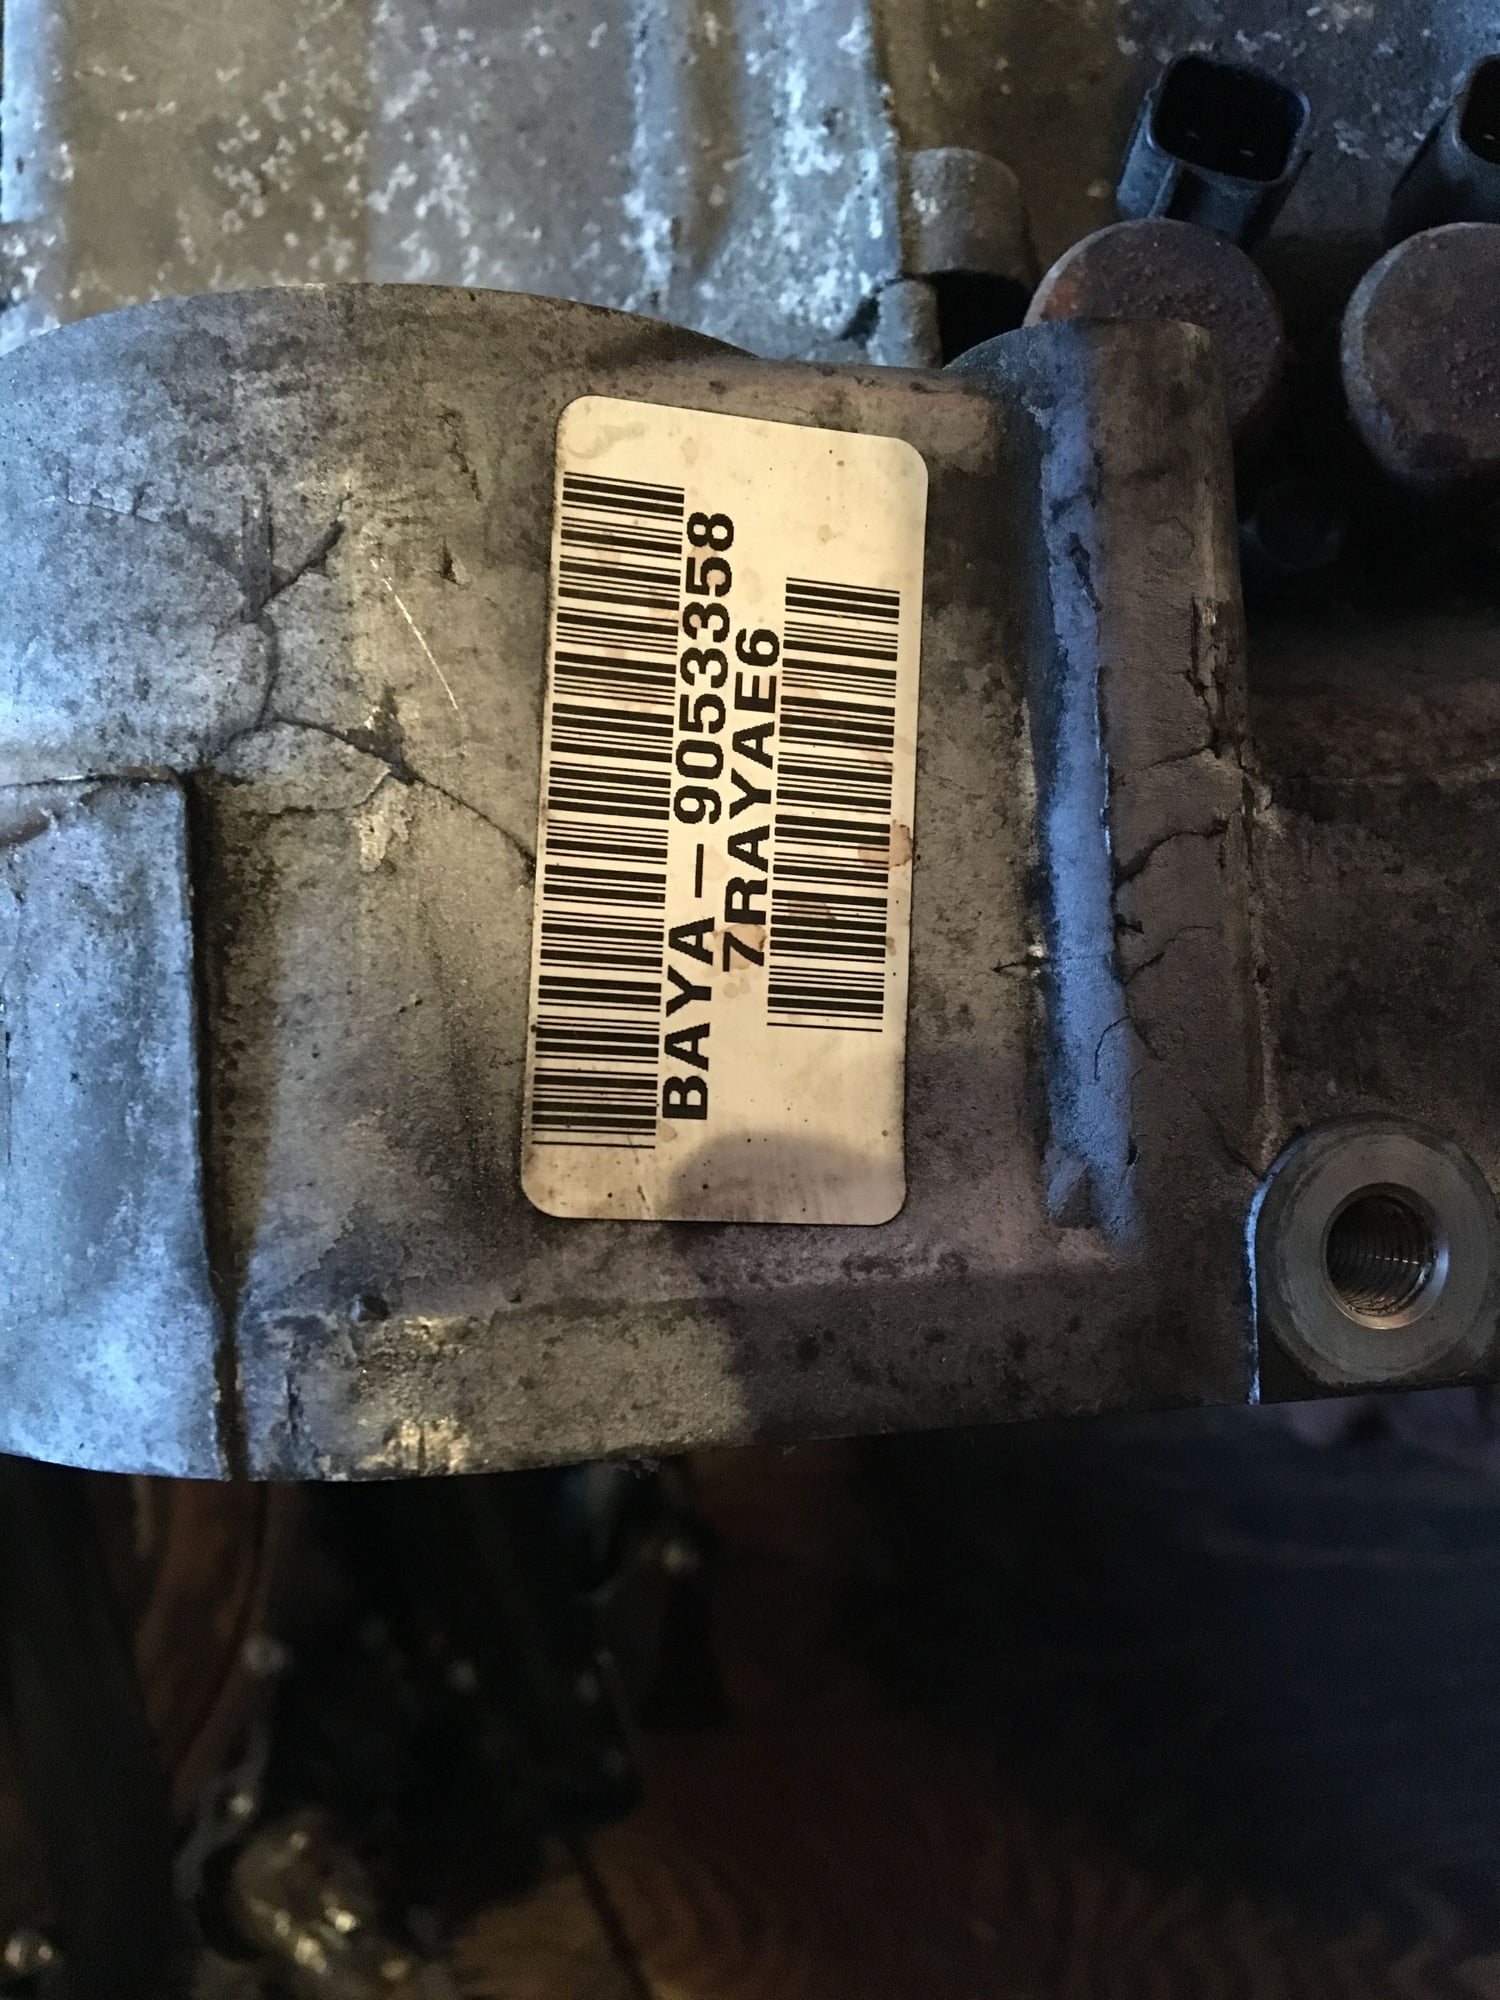 Drivetrain - SOLD: 2007 Accord AV6 Transmission - Used - 2007 Honda Accord - 2001 to 2003 Acura TL - 2001 to 2003 Acura CL - Baltimore, MD 21214, United States